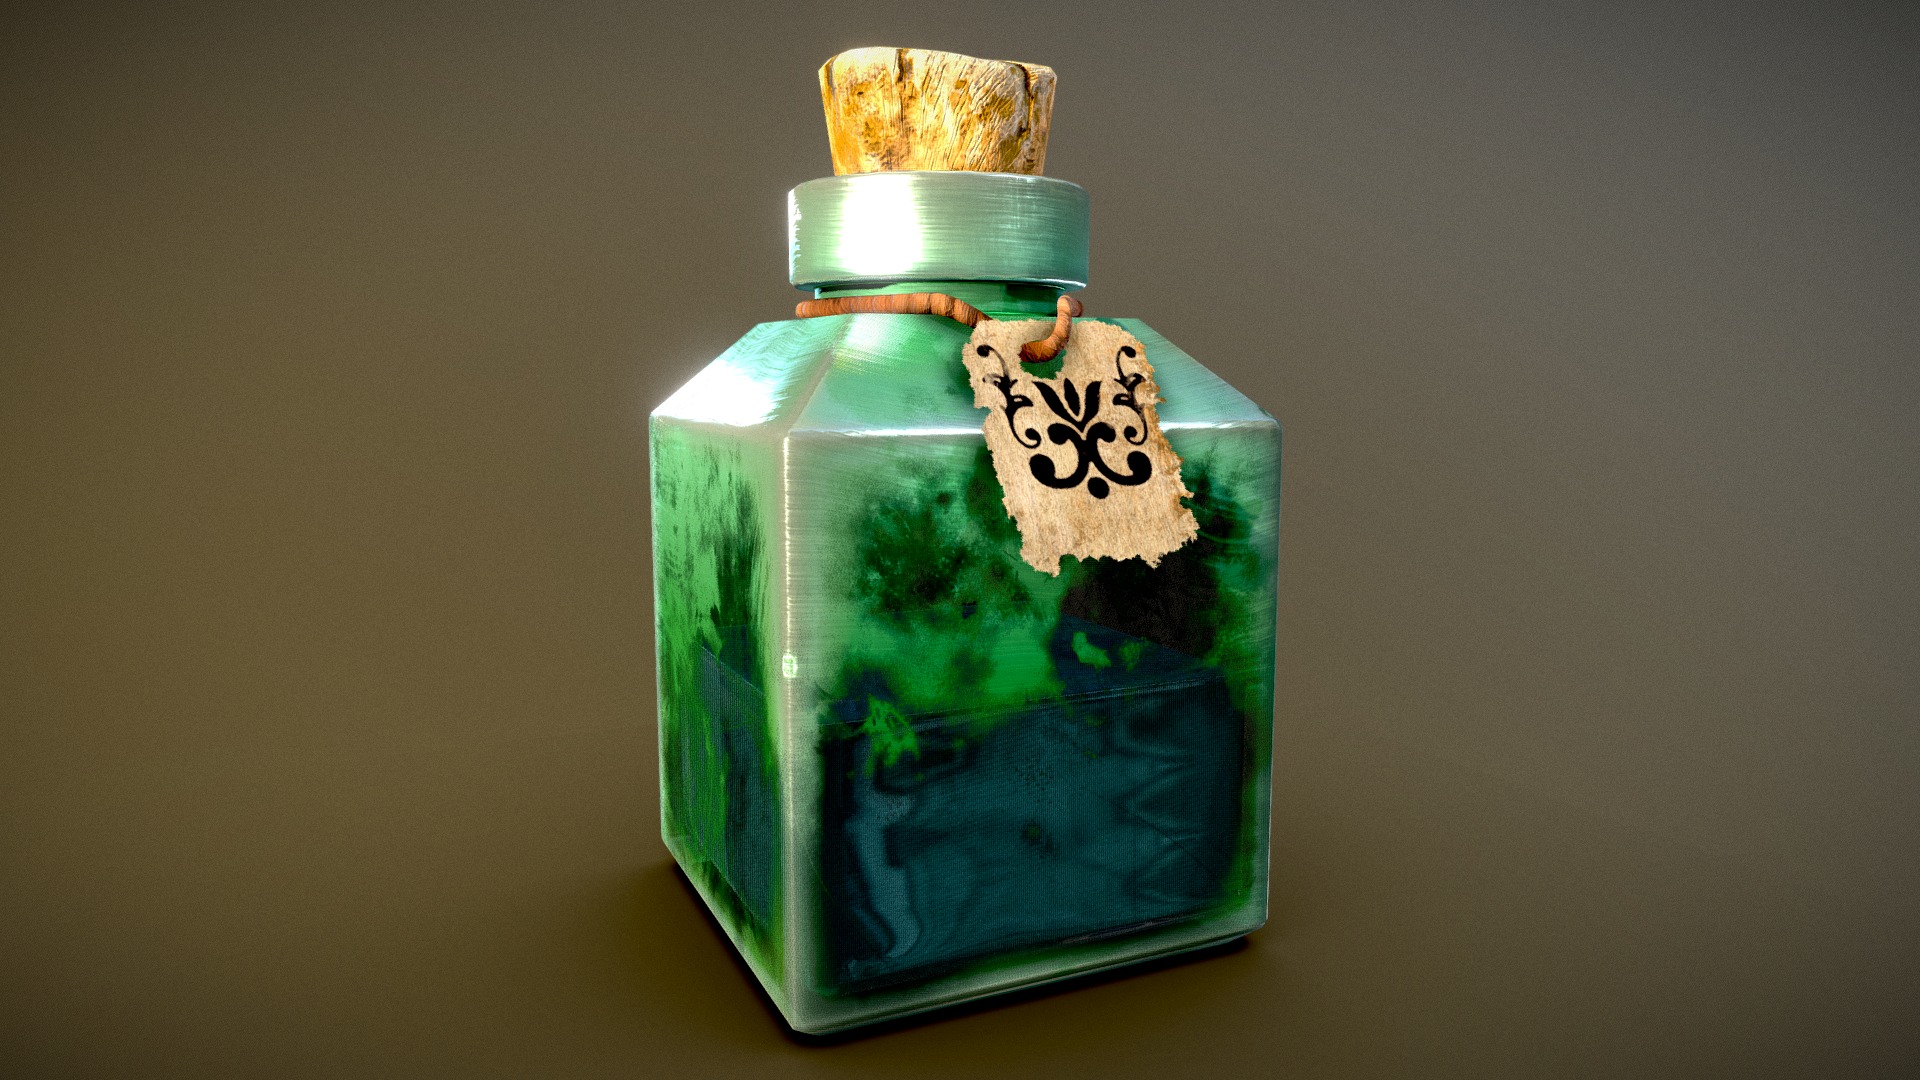 3D model Green Elixir Potion - This is a 3D model of the Green Elixir Potion. The 3D model is about a glass jar with a cat on it.